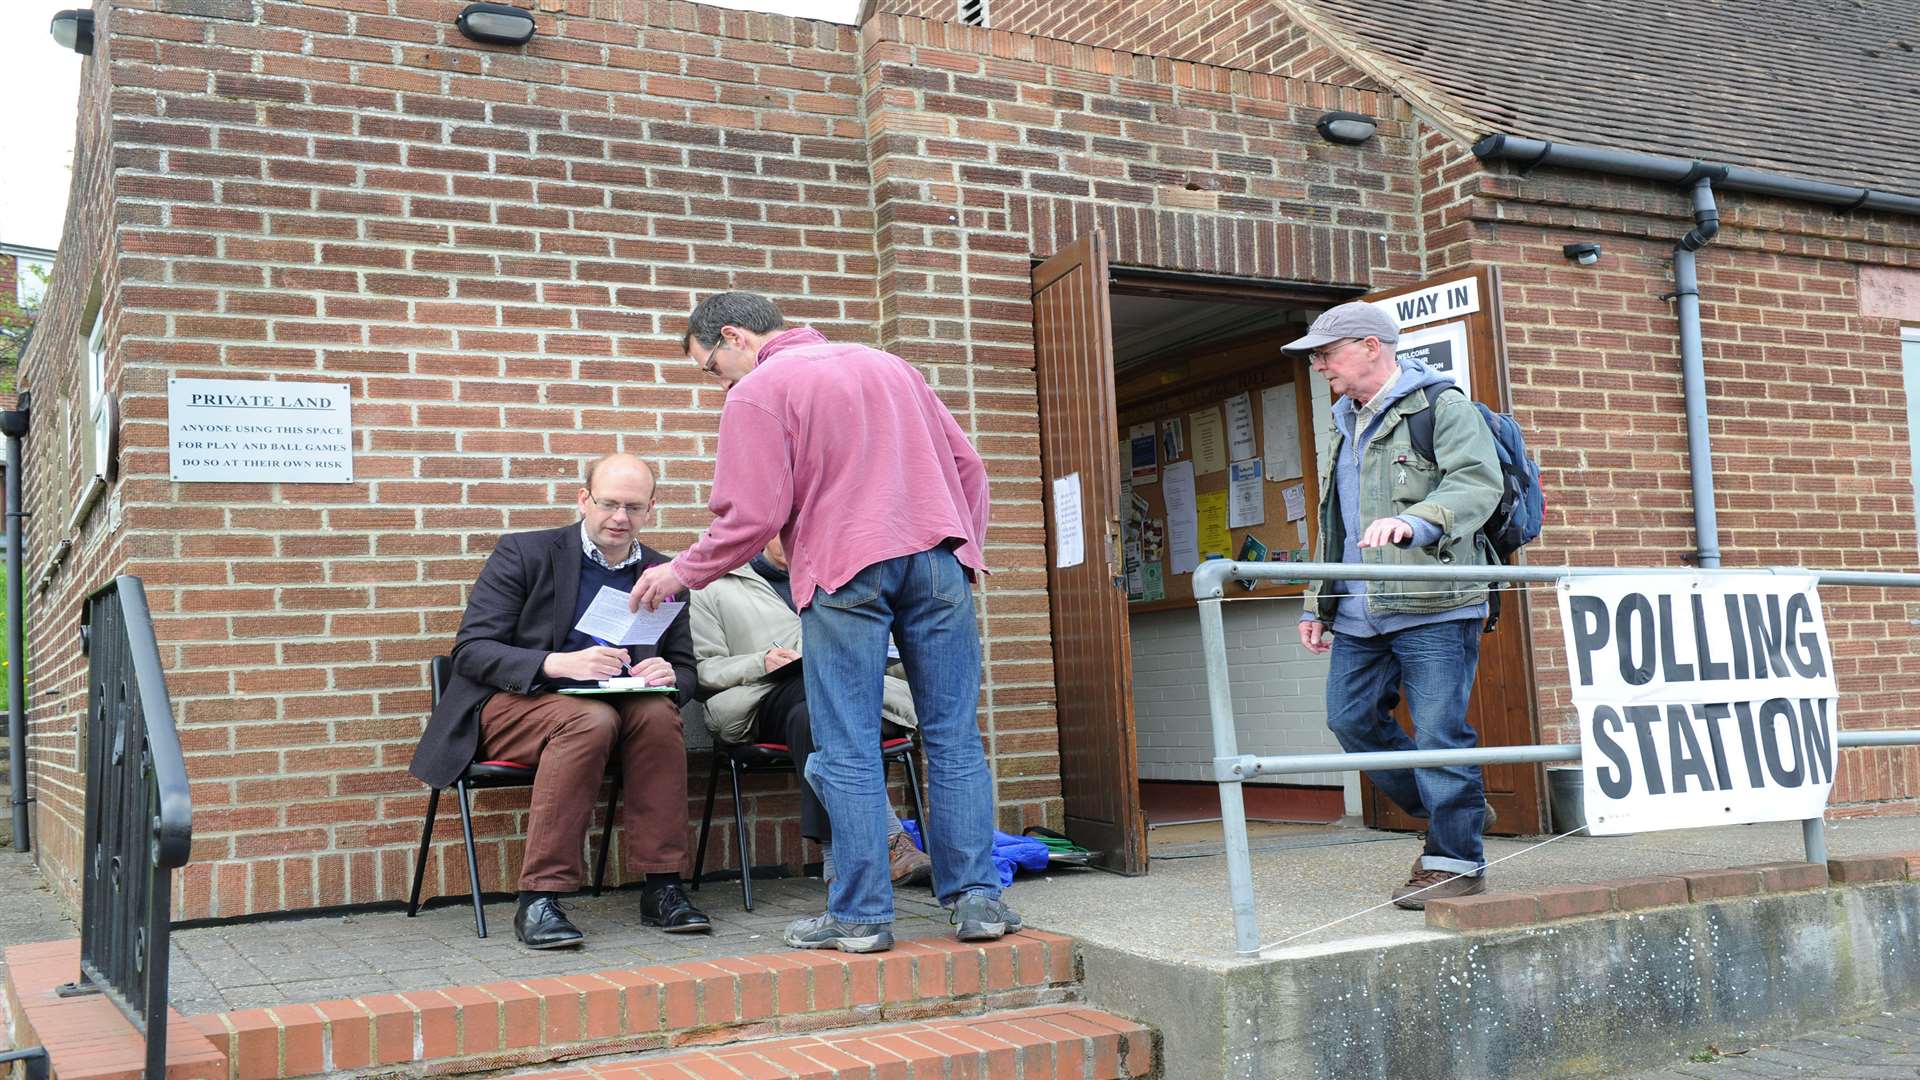 People attend Borstal Village Hall to cast their vote